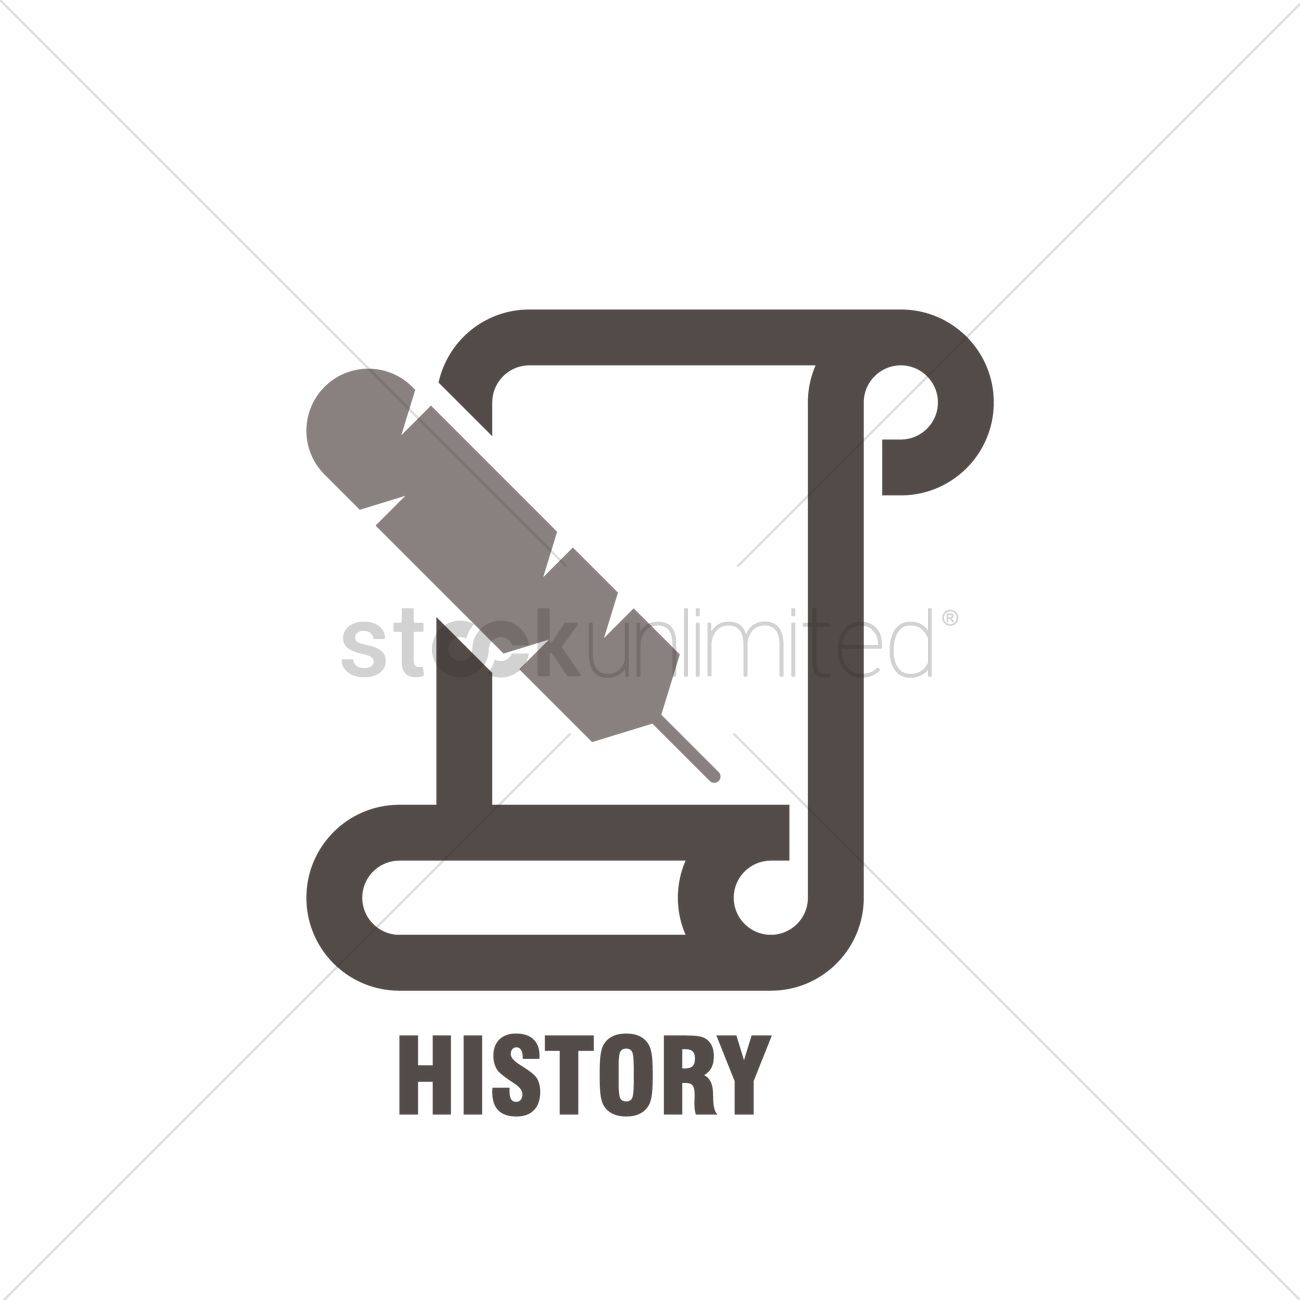 History Icons - 364 free vector icons